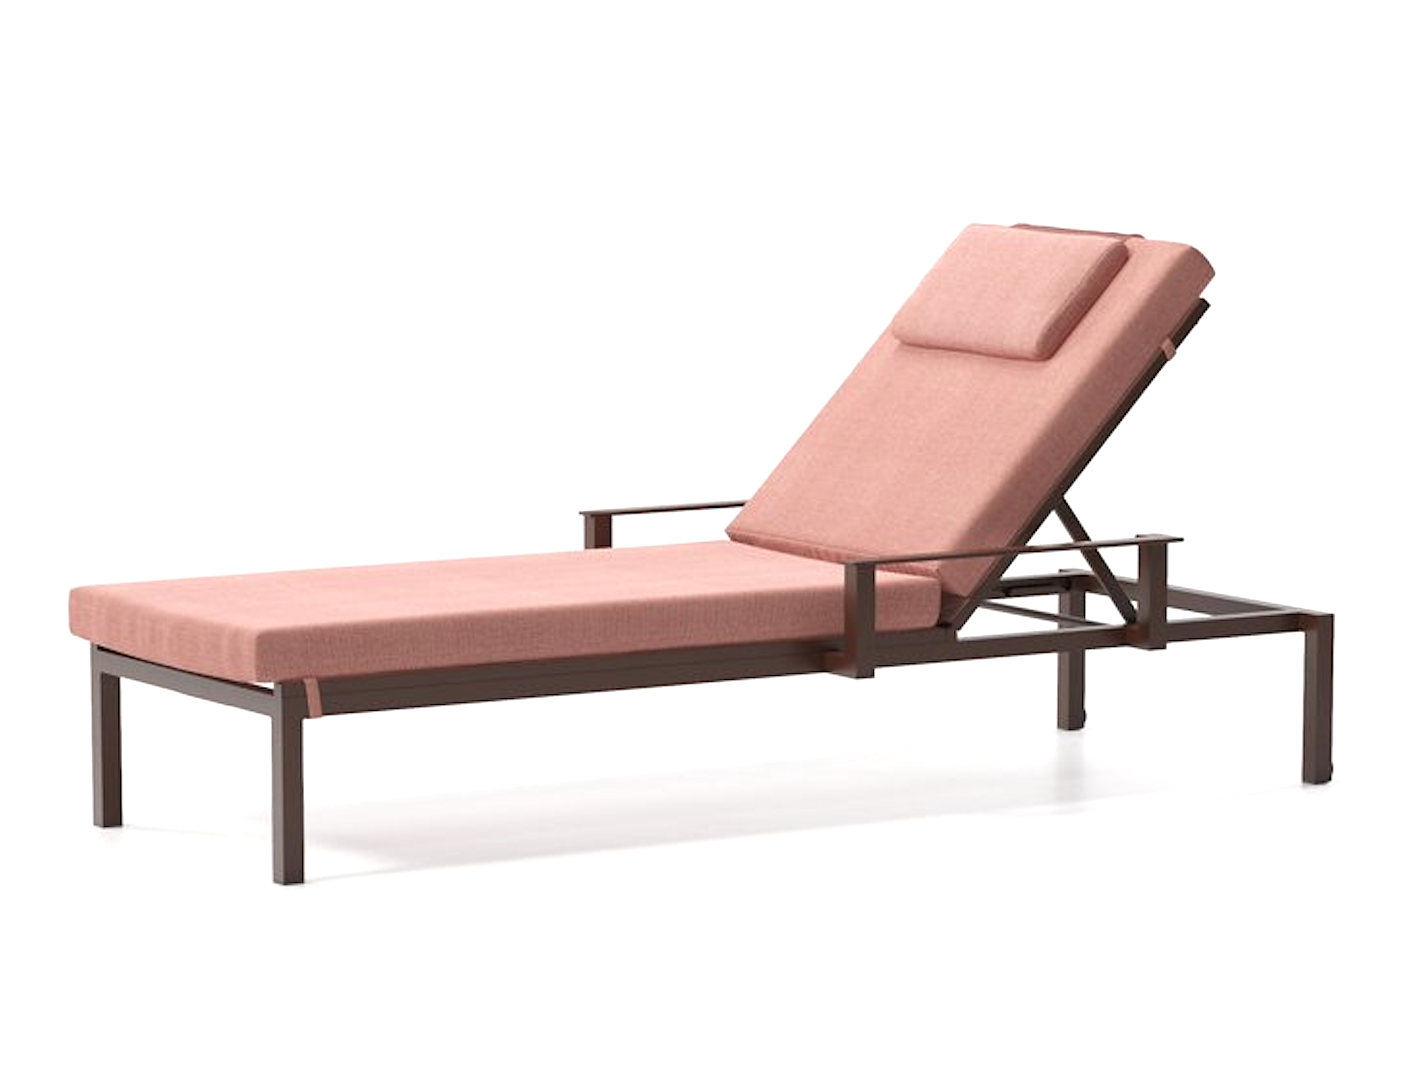 Product Image Landscape stackable sunlounger with arms